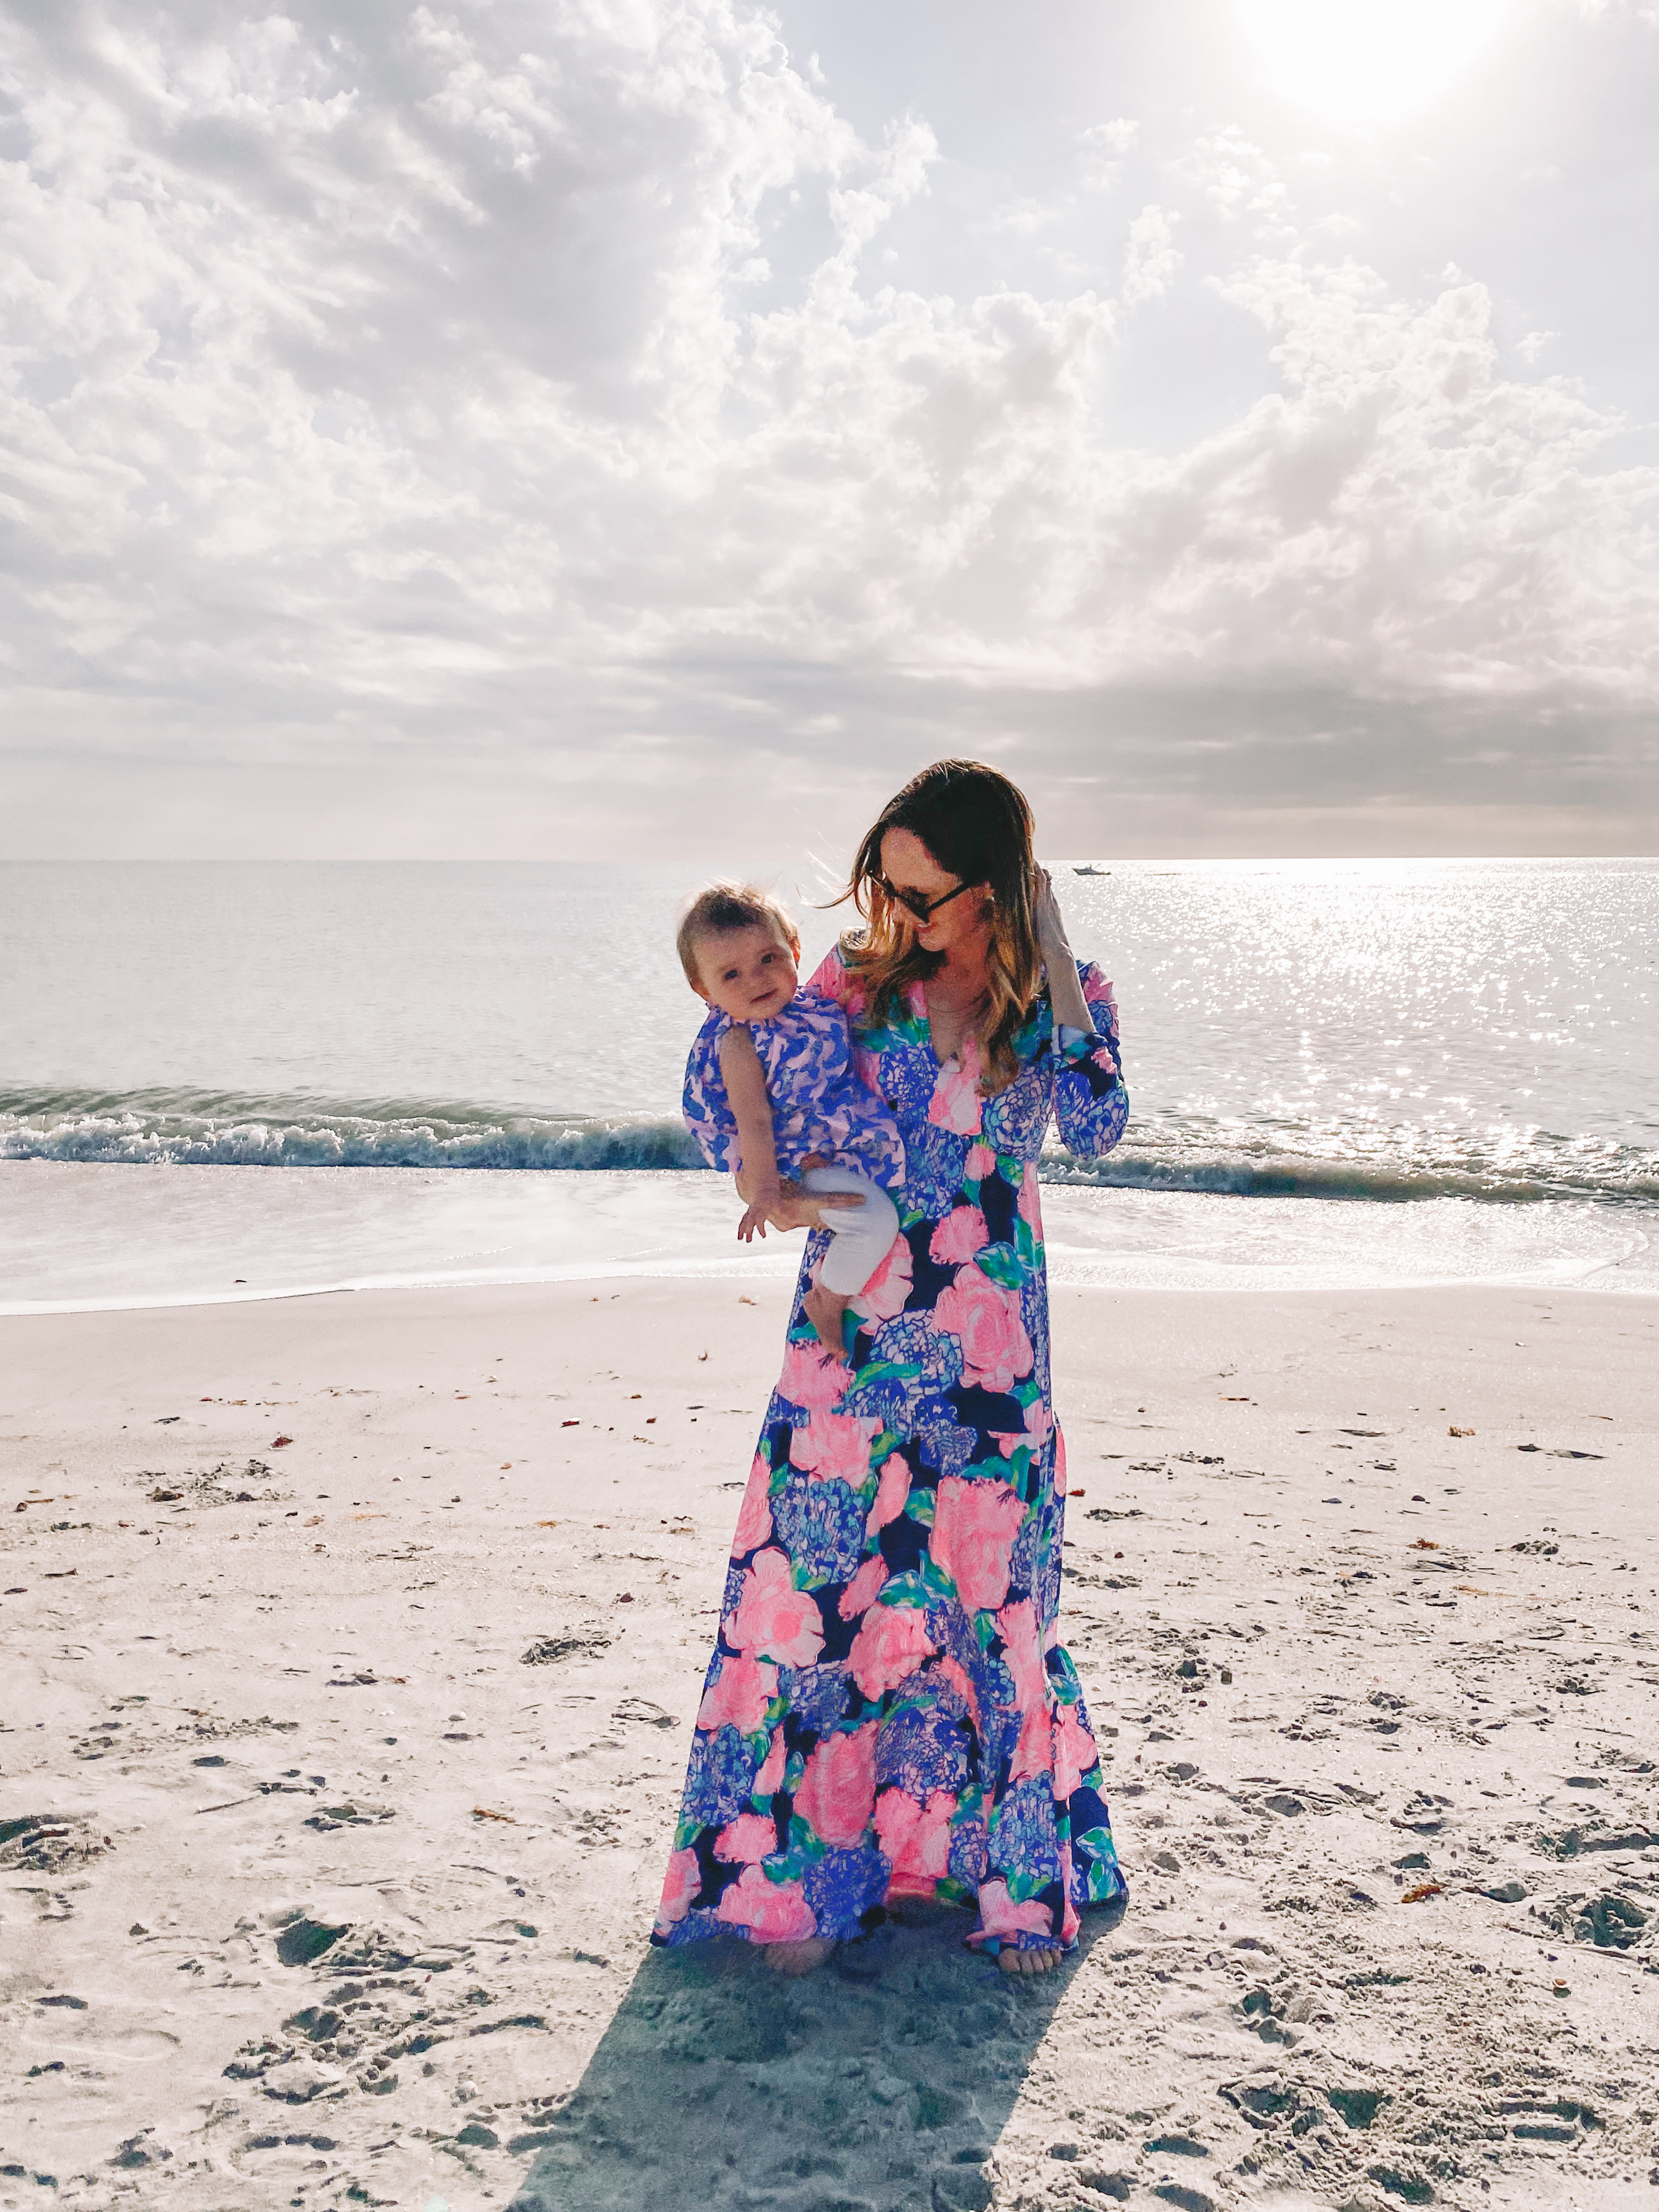 Lilly Pulitzer New Styles + what we own